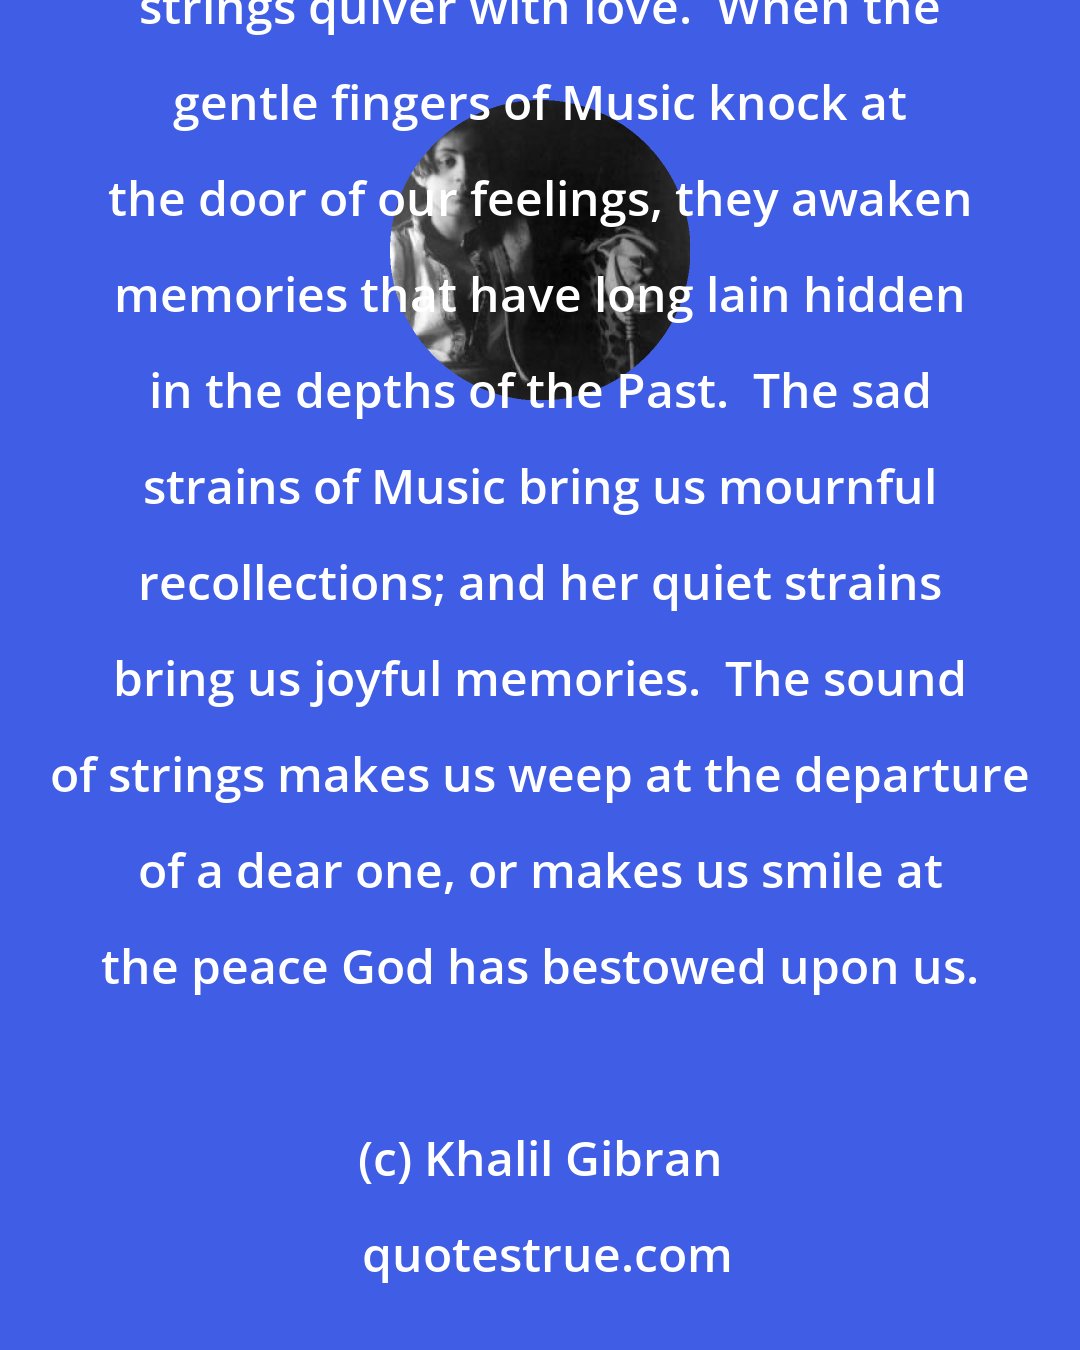 Khalil Gibran: My friends:  Music is the language of spirits.  Its melody is like the frolicsome breeze that makes the strings quiver with love.  When the gentle fingers of Music knock at the door of our feelings, they awaken memories that have long lain hidden in the depths of the Past.  The sad strains of Music bring us mournful recollections; and her quiet strains bring us joyful memories.  The sound of strings makes us weep at the departure of a dear one, or makes us smile at the peace God has bestowed upon us.